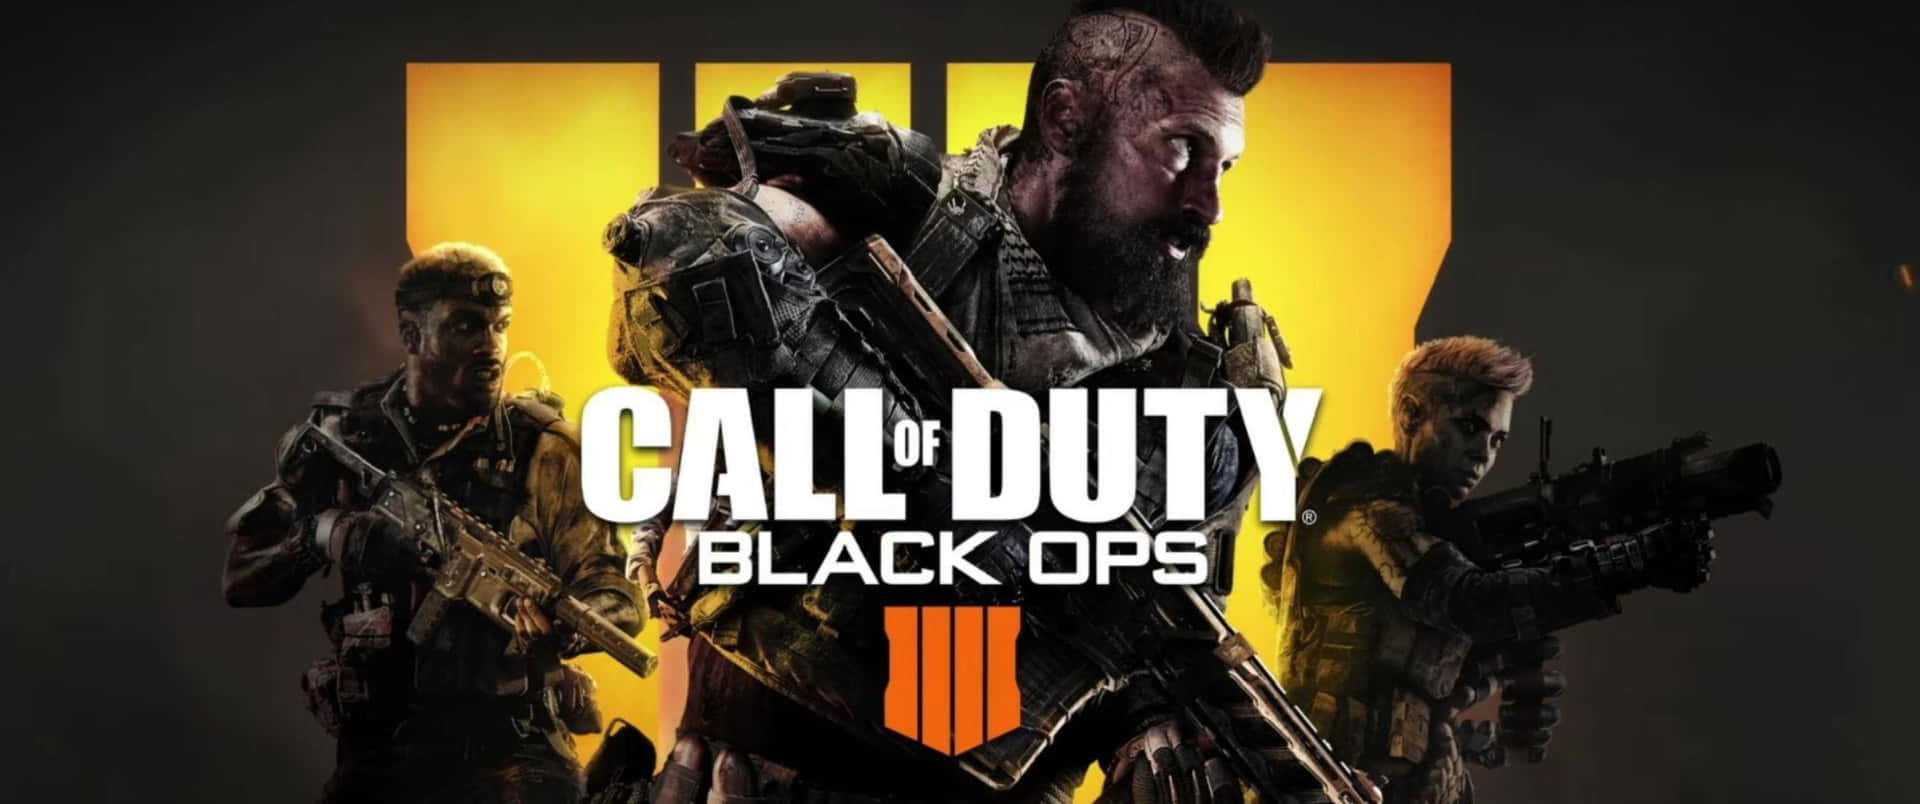 No Place to Hide in Call of Duty: Black Ops 4